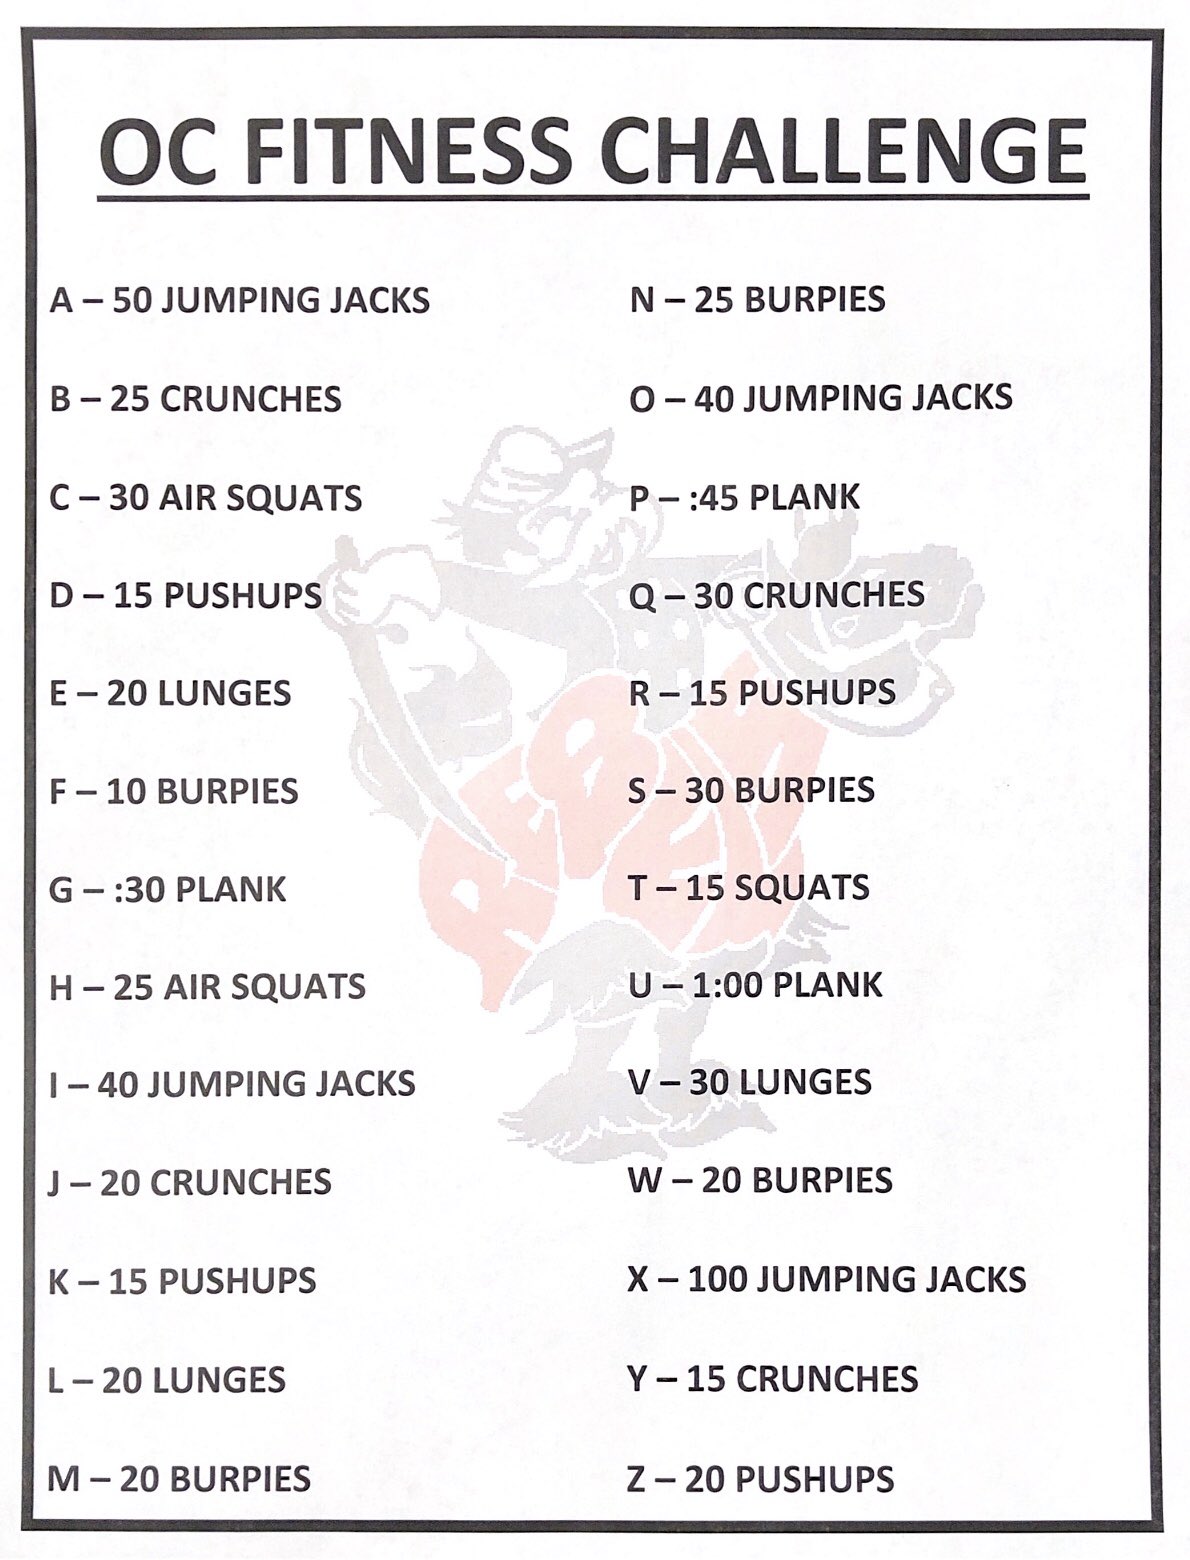 Your 30-day jumping jack challenge